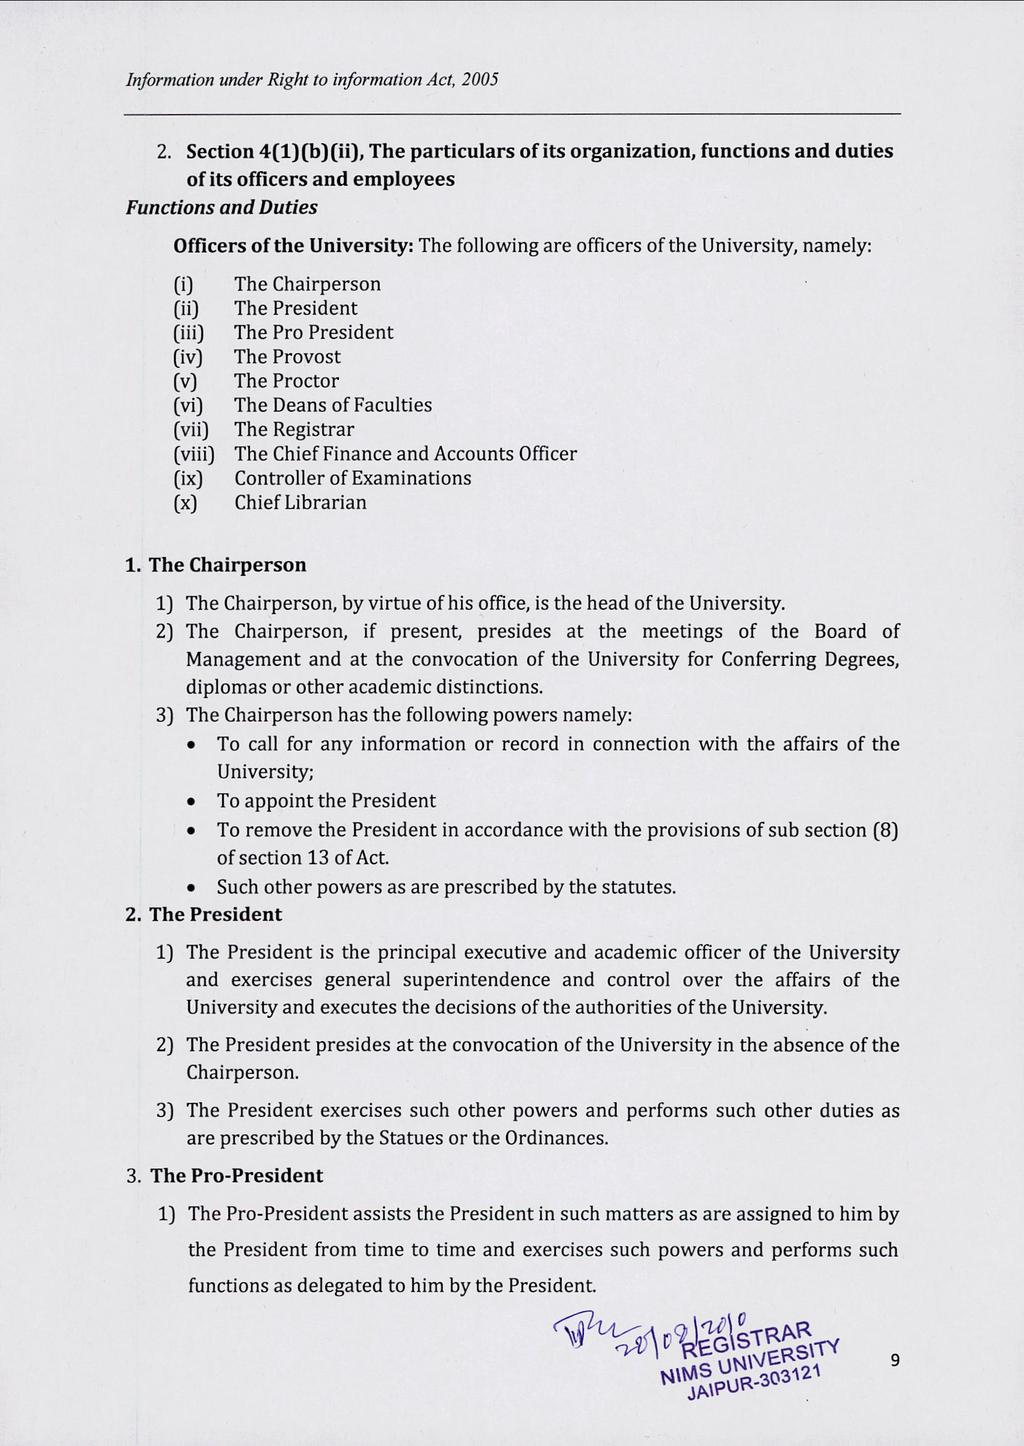 2. Section 4(1)(b)(ii), The particulars of its organization, functions and duties of its officers and employees Functions and Duties Officers of the University: (i) (ii) (iii) (iv) (v) (vi) (vii)